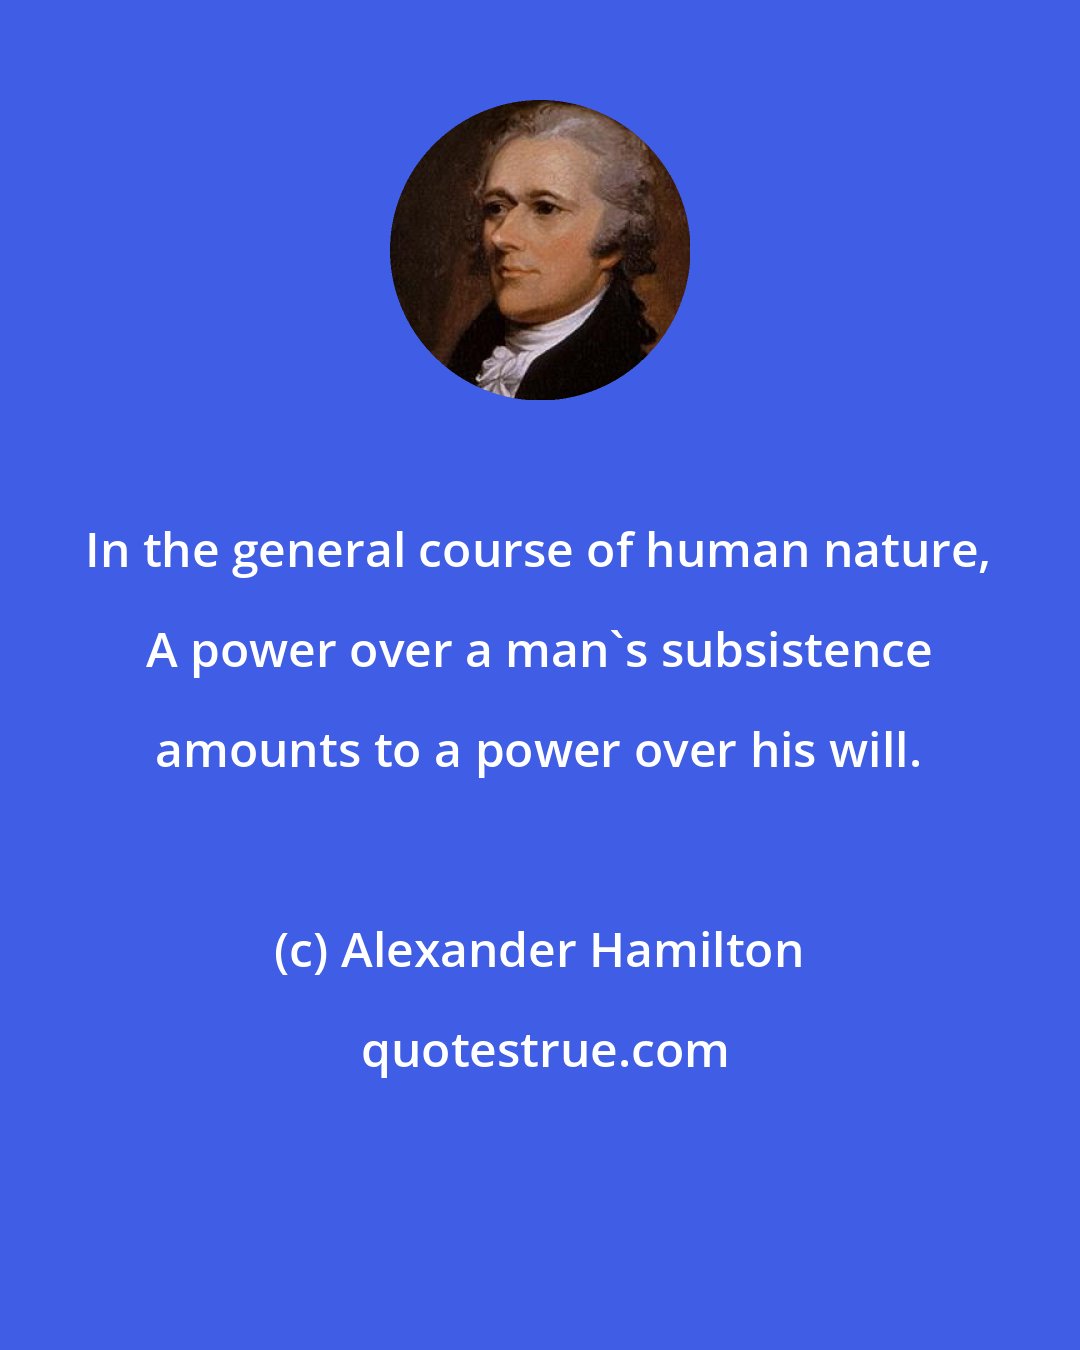 Alexander Hamilton: In the general course of human nature, A power over a man's subsistence amounts to a power over his will.